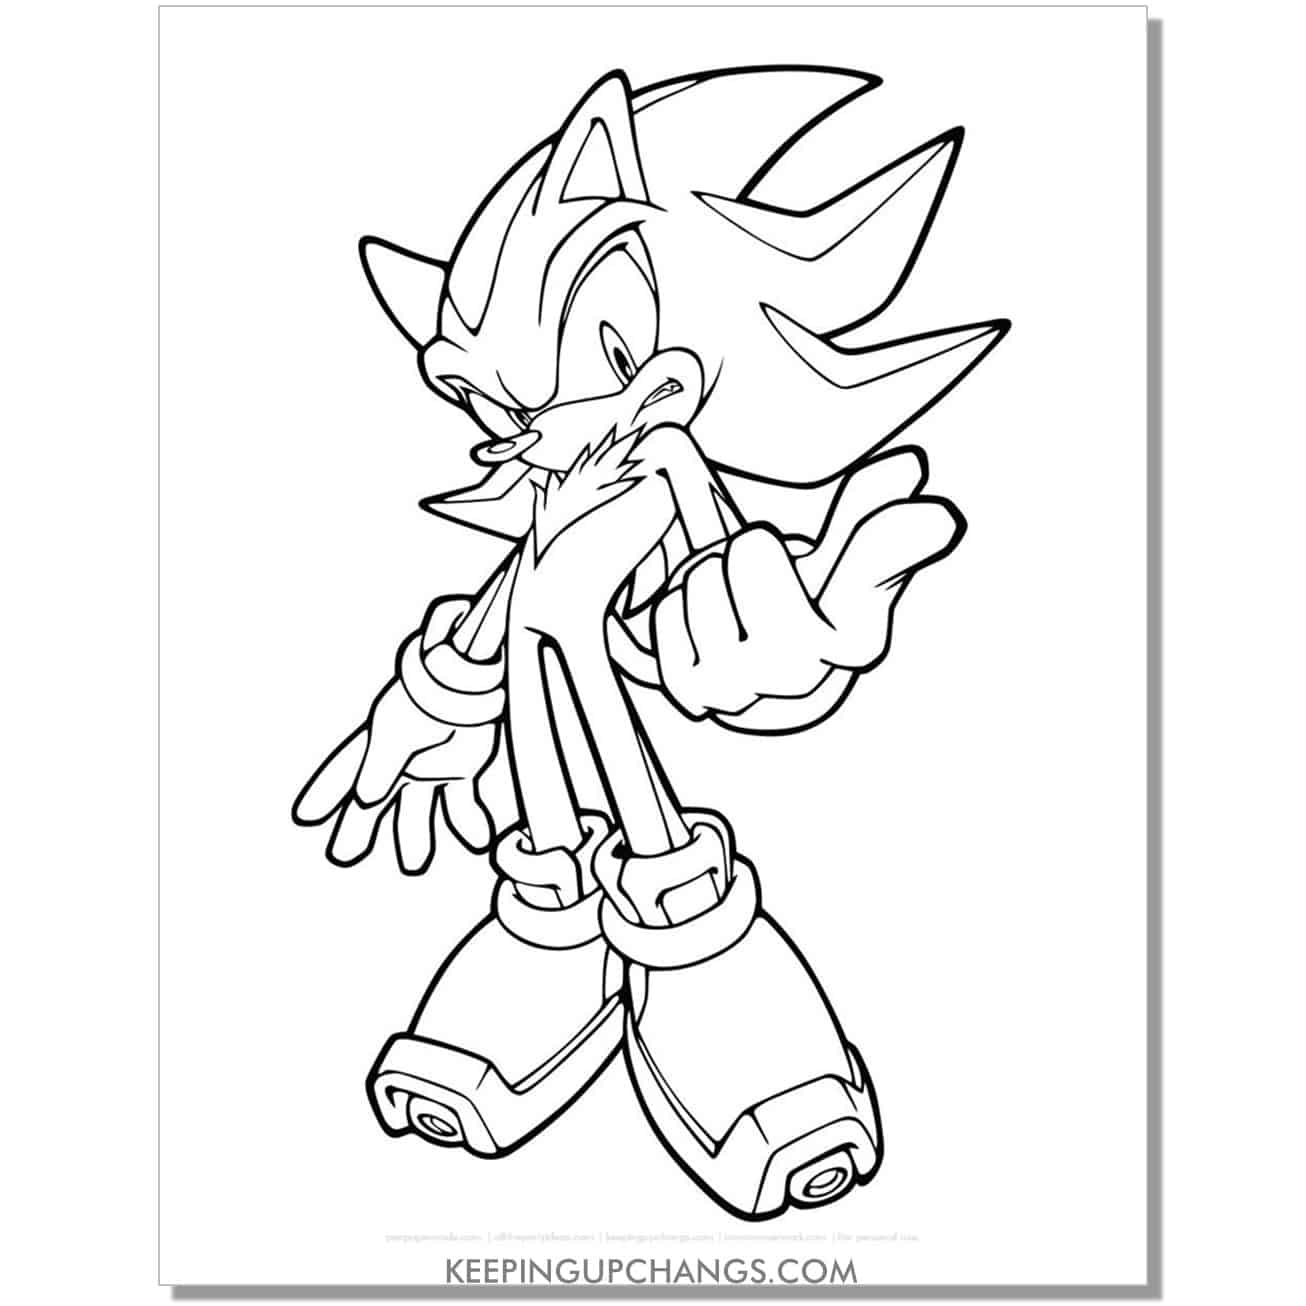 Free sonic the hedgehog coloring pages popular printables